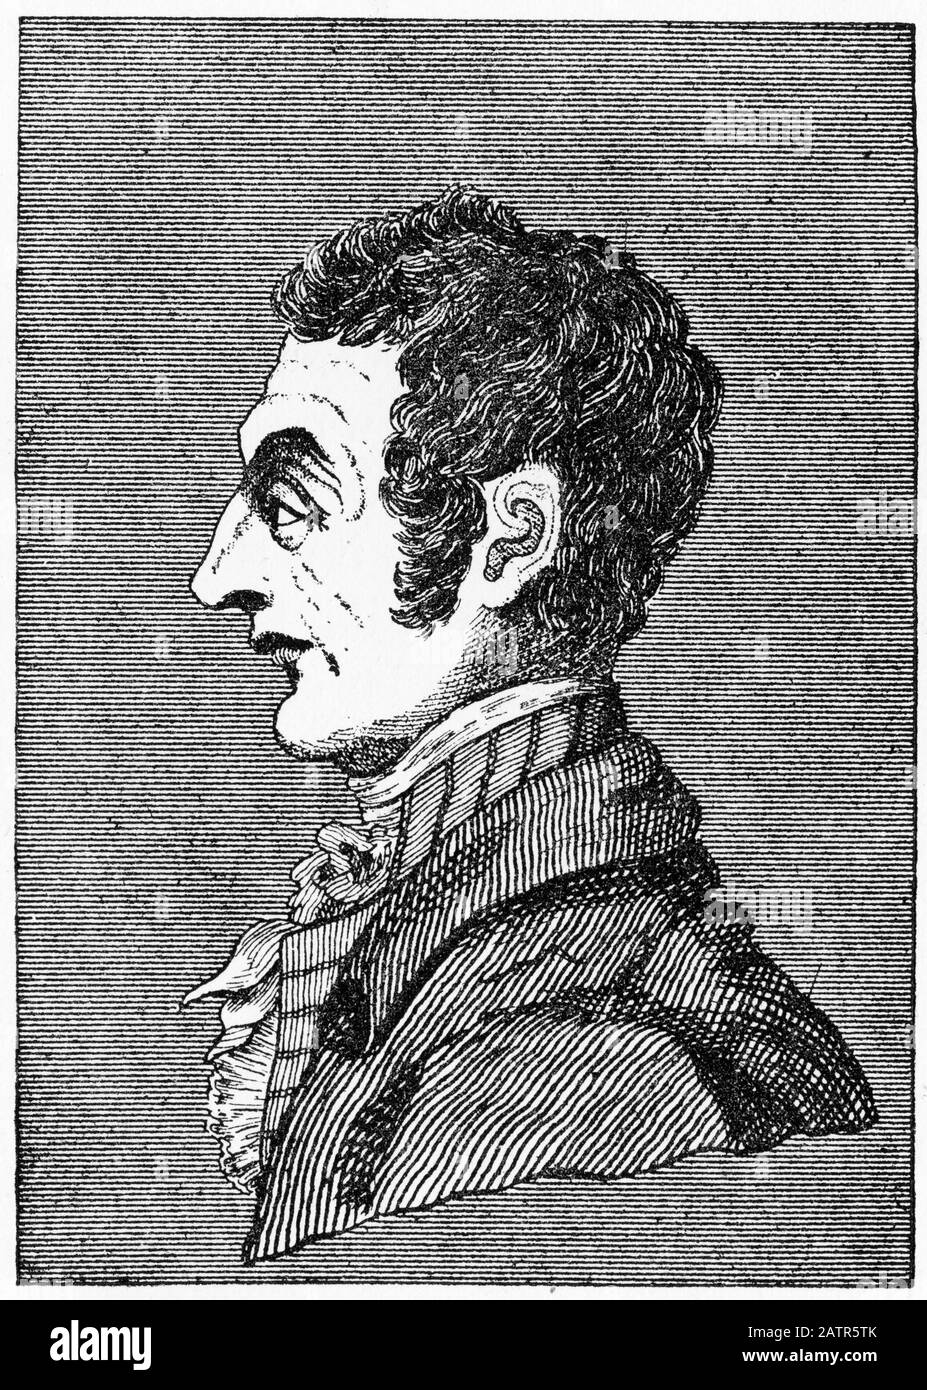 Engraving of John Bellingham (1769 – 18 May 1812) assassin of British Prime Minister Spencer Perceval, hanged at Newgate prison, London, England. From The Chronicles of Newgate, 1884. Stock Photo